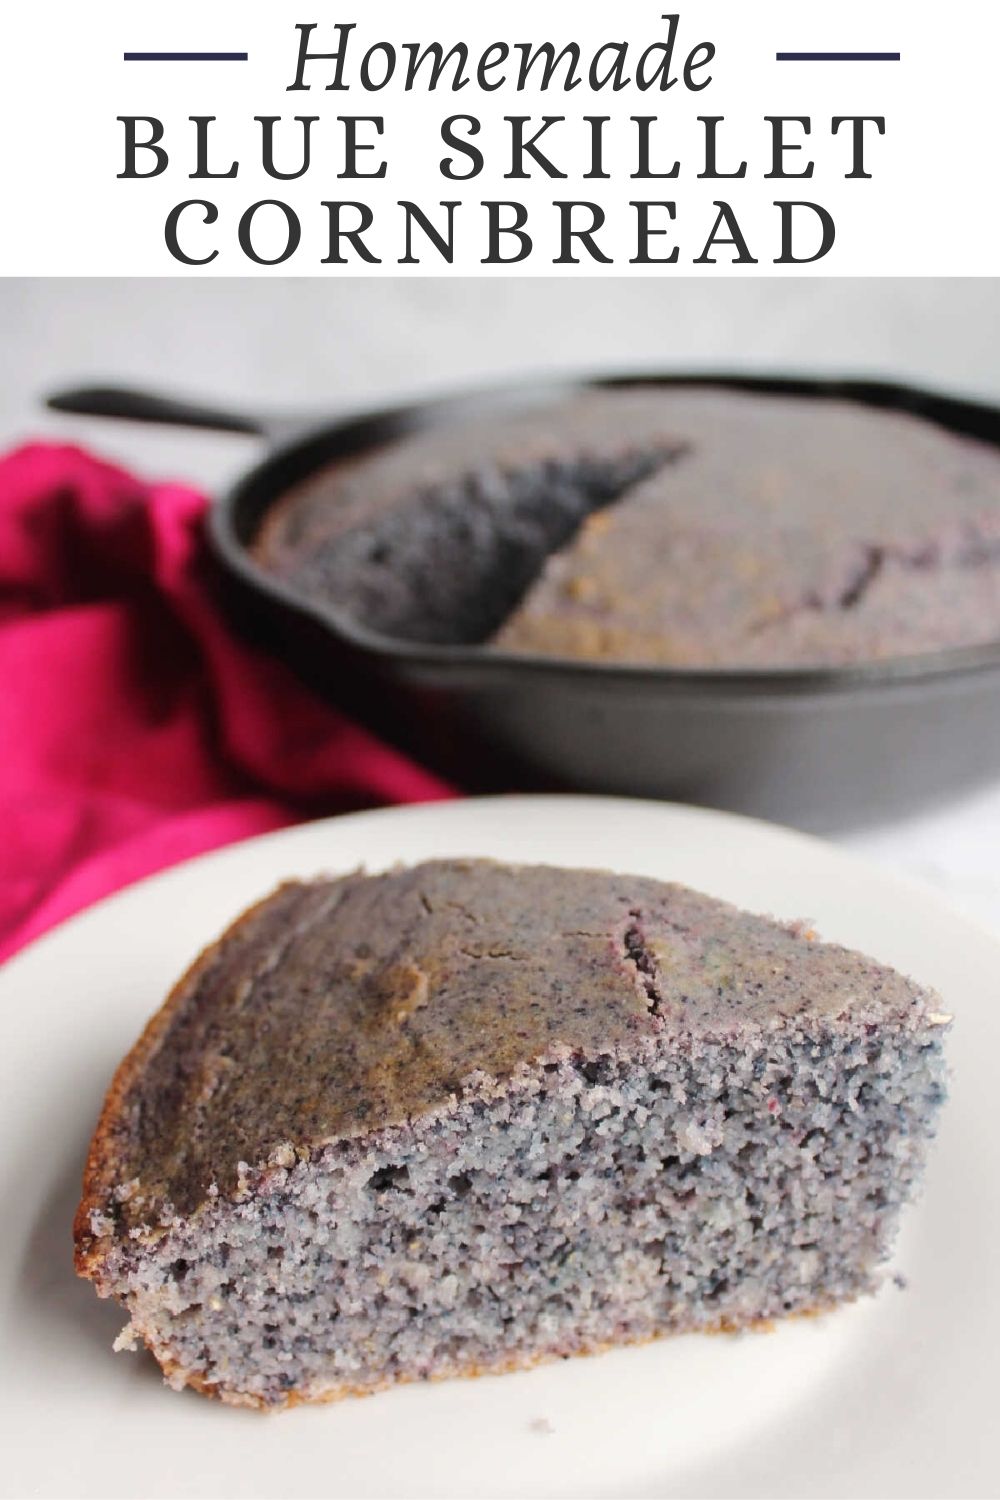 This blue skillet cornbread recipe uses blue cornmeal to make a fun colored pan of slightly sweet cornbread. It is the perfect mix of fluffy and crumbly and is perfect as a side to so many meals. 